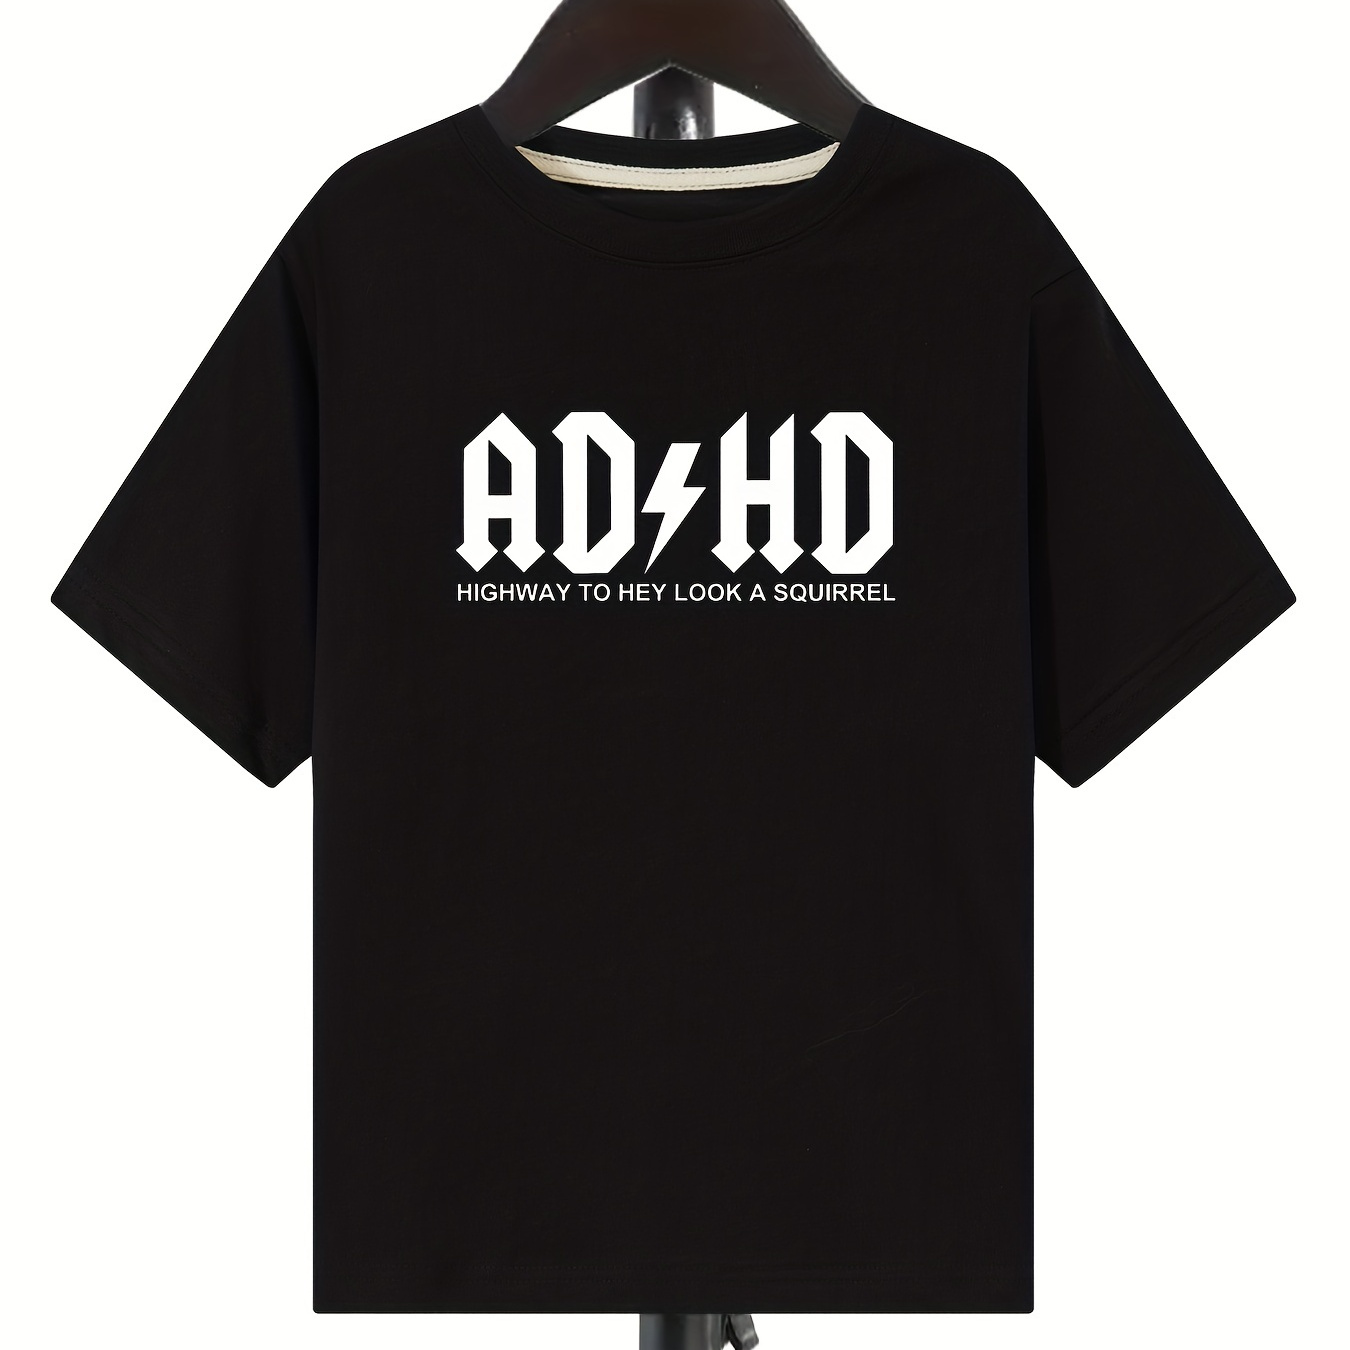 

Trendy Adhd Letter Print Boys Creative Cotton T-shirt, Casual Lightweight Comfy Short Sleeve Crew Neck Tee Tops, Kids Clothings For Summer